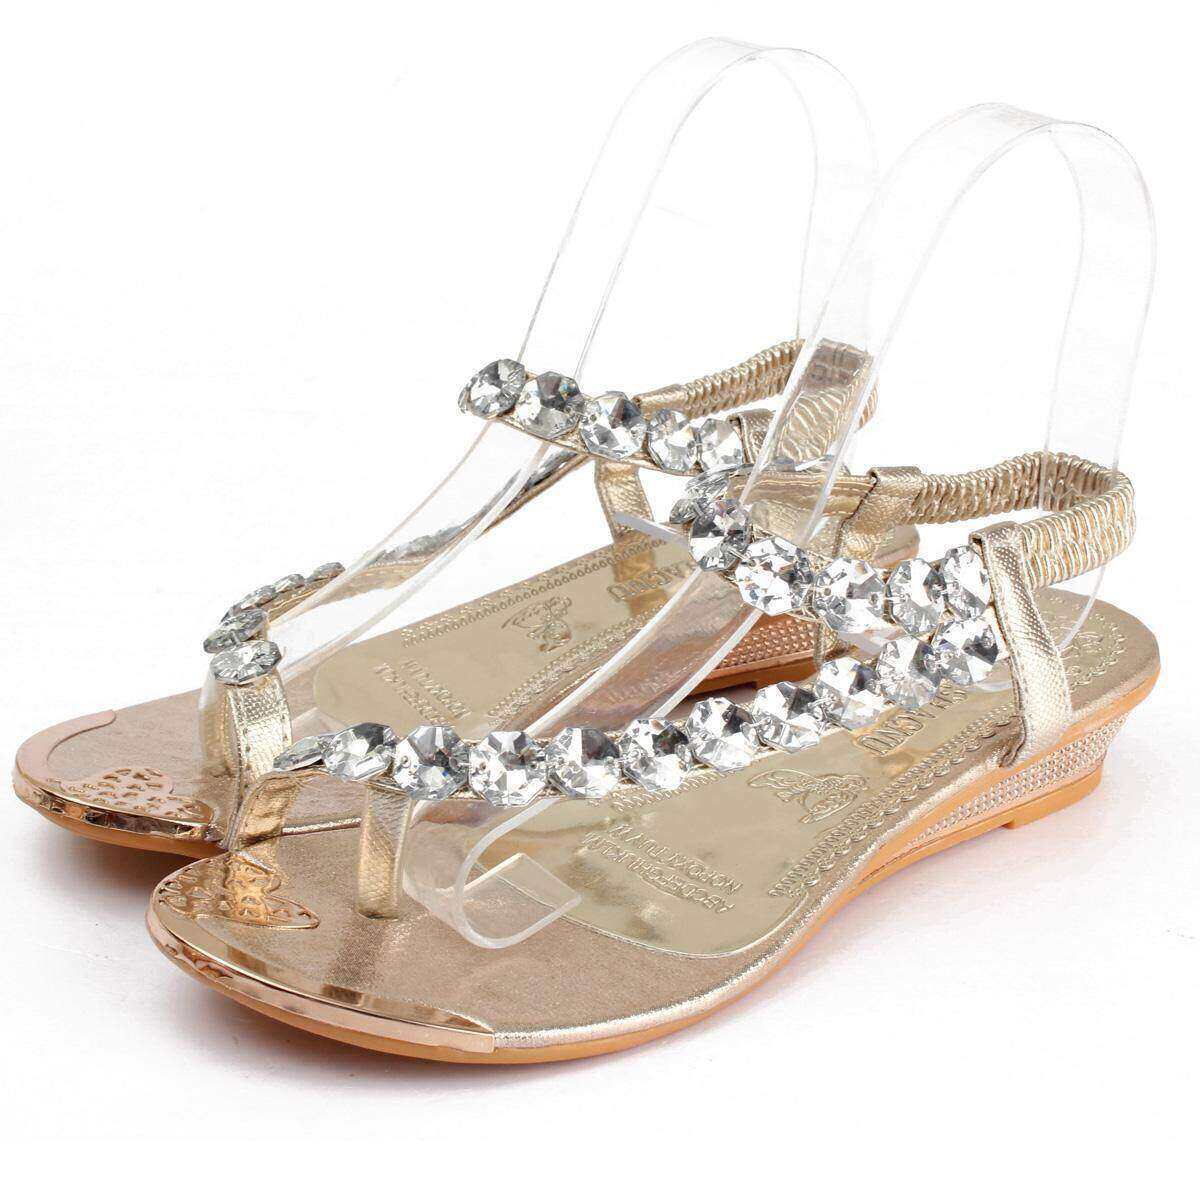 BODOAO Women Bohemia Sandals Ladies Bling Flower Crystal Flat Sandals Beach Casual Shoes 